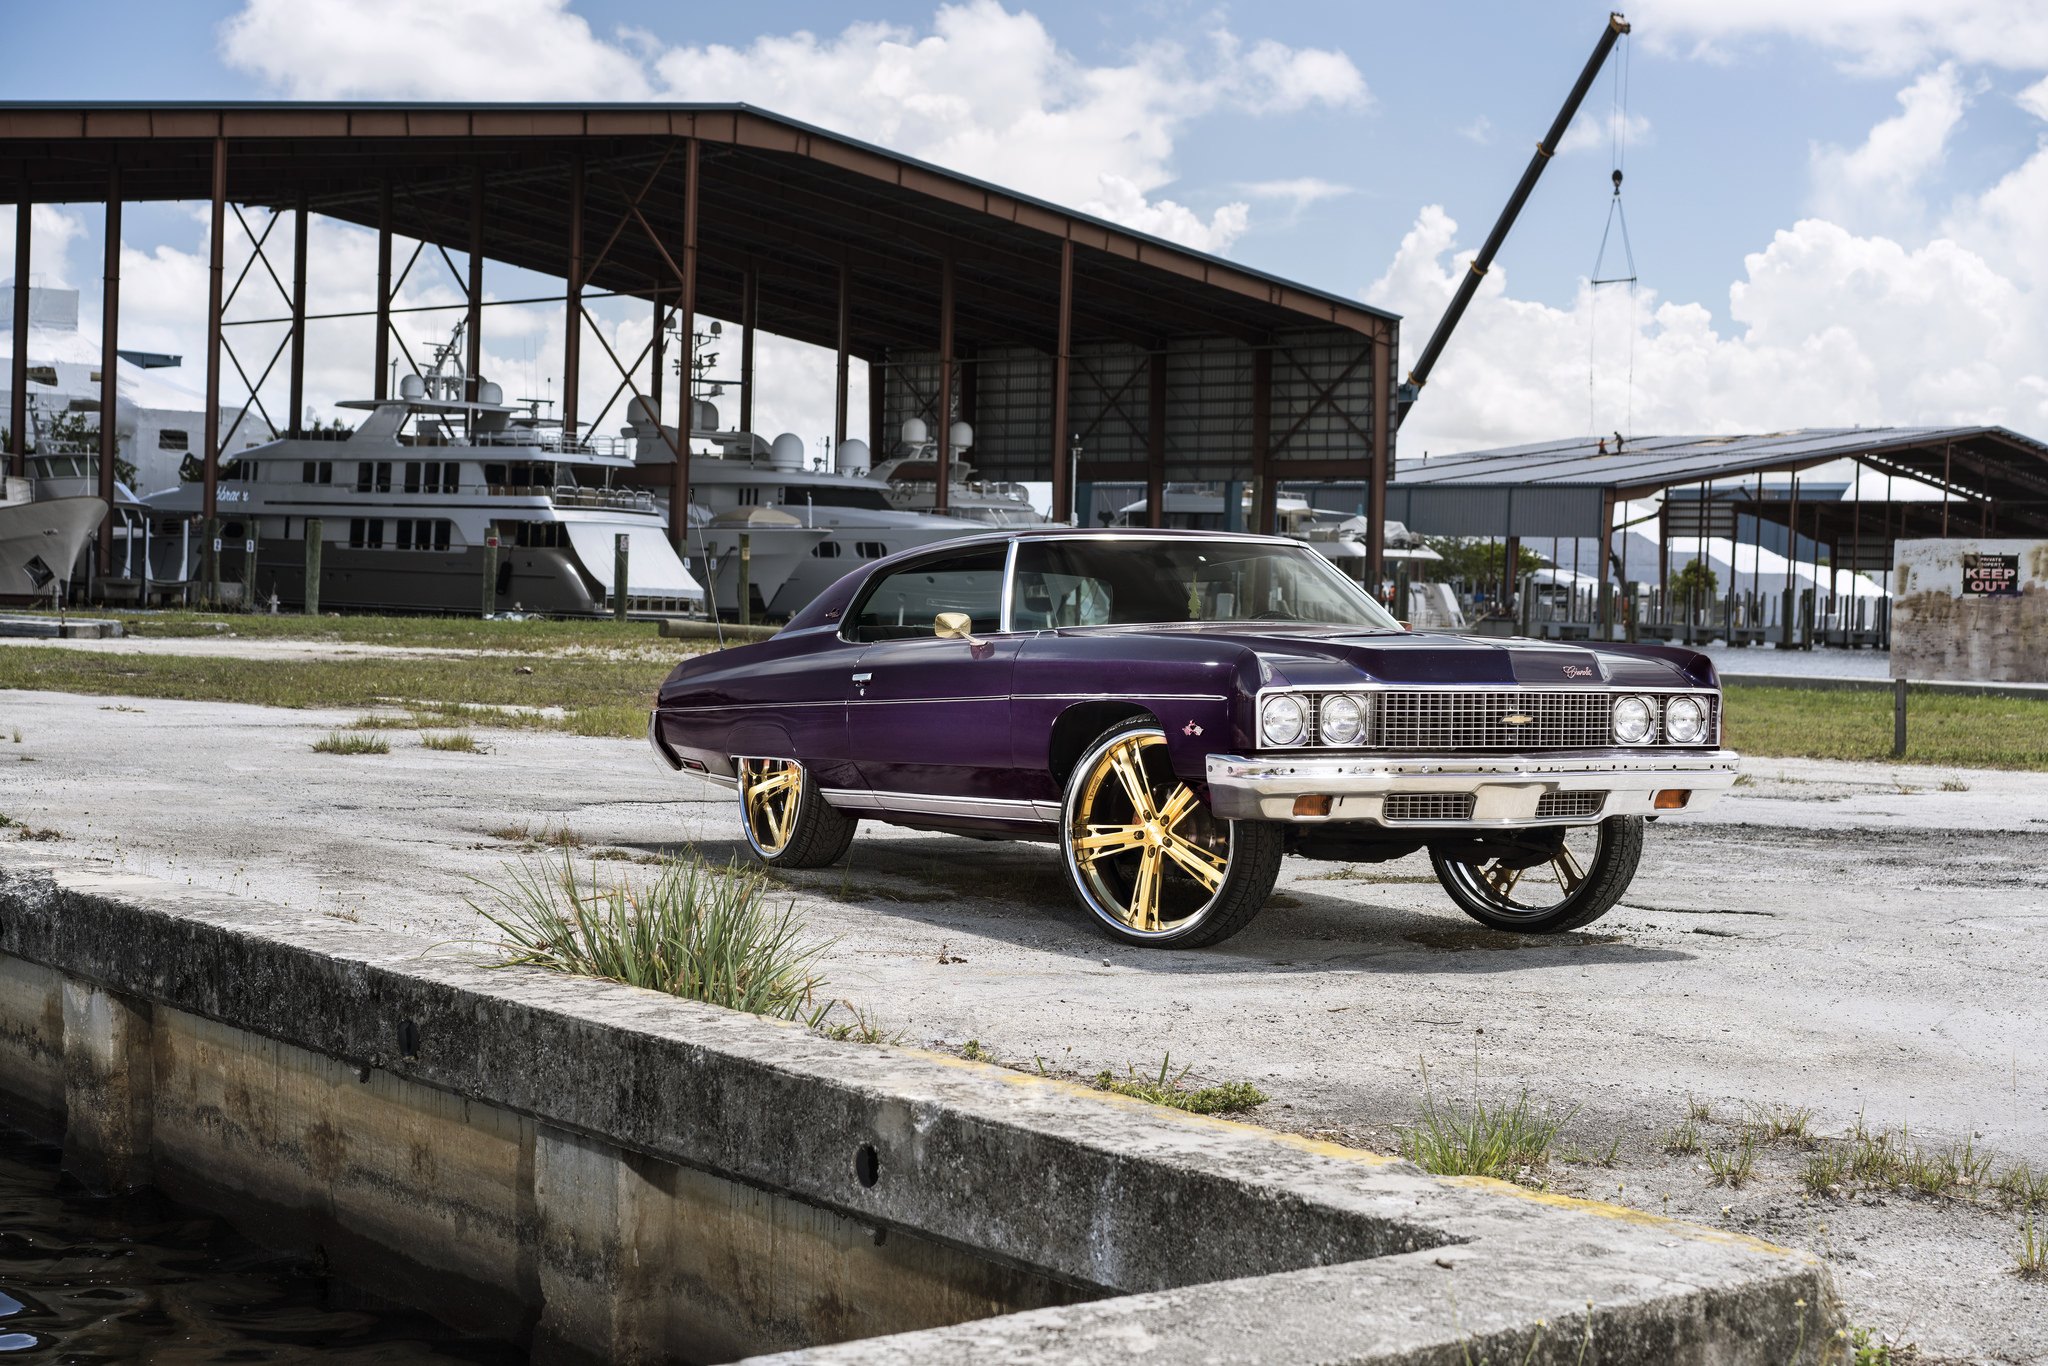 Custom Chrome Front Bumper Cover on Purple Chevy Impala - Photo by DUB